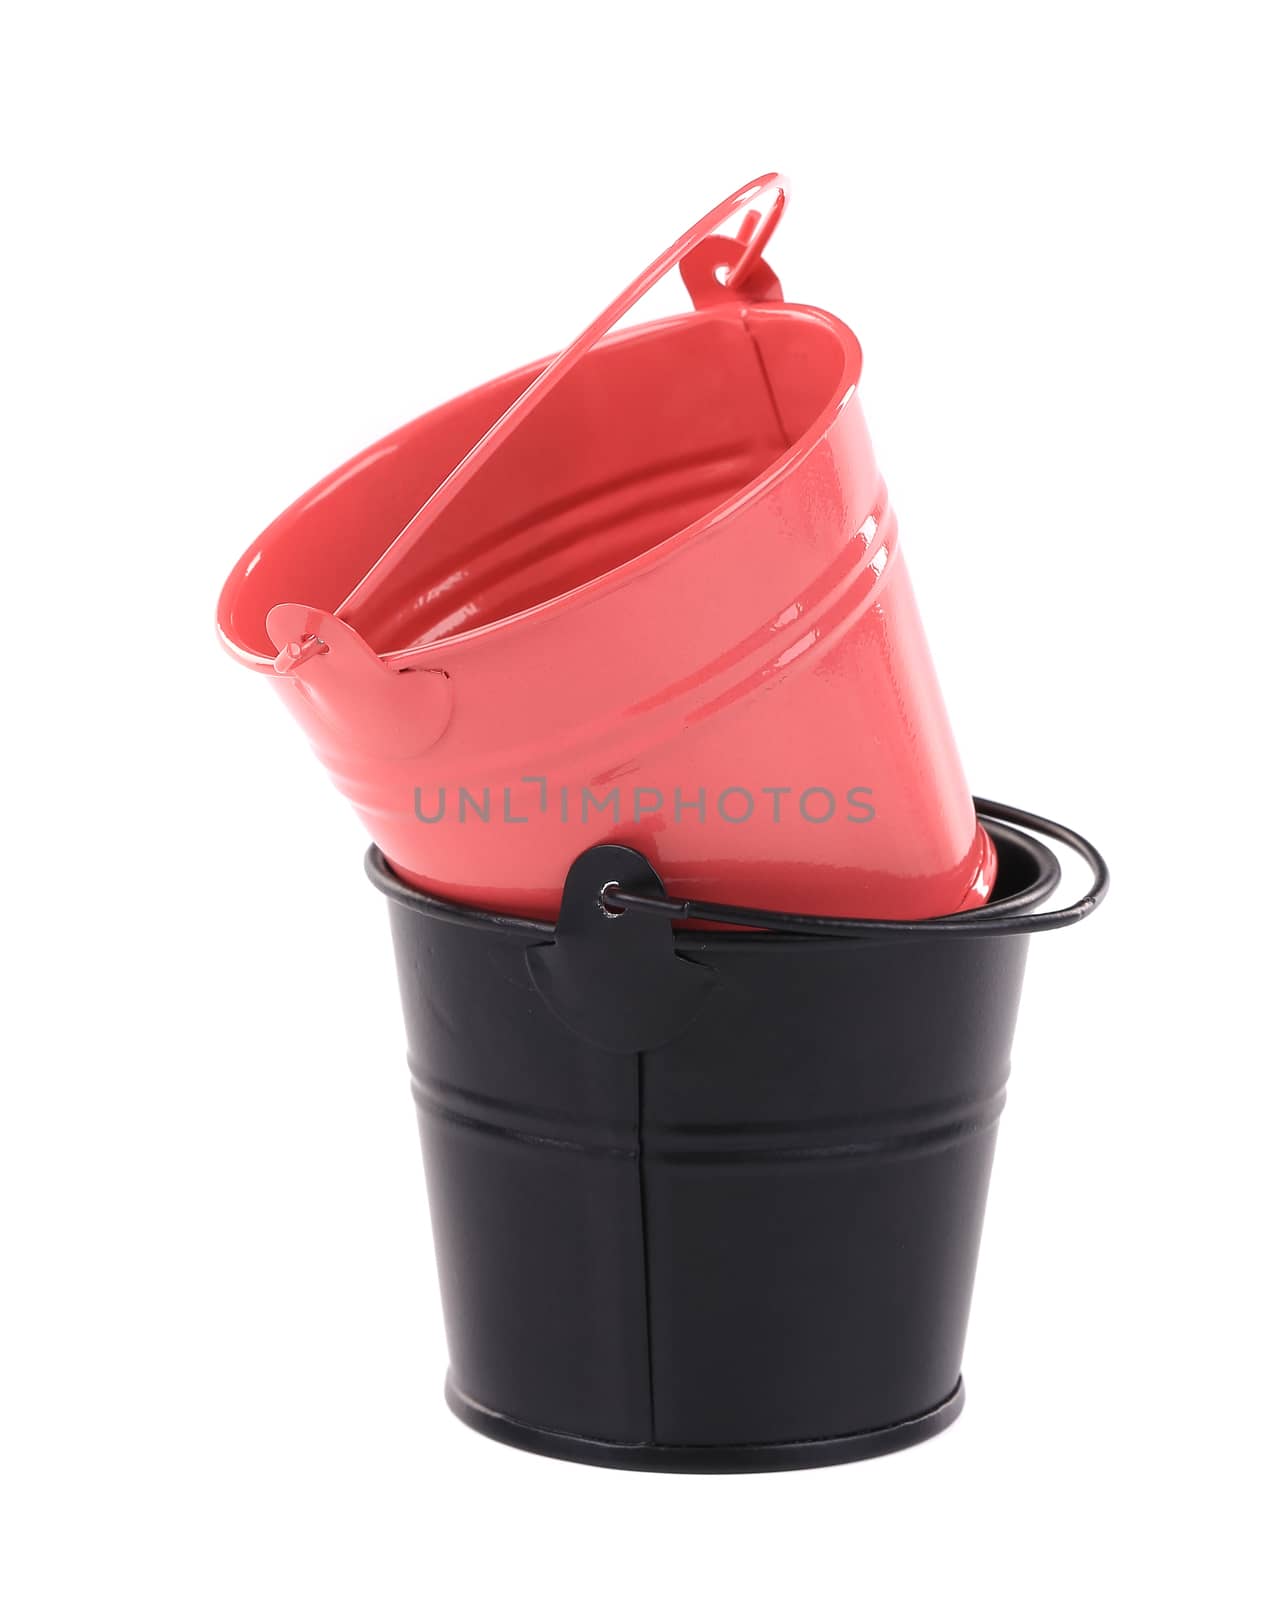 Red and black bucket. by indigolotos